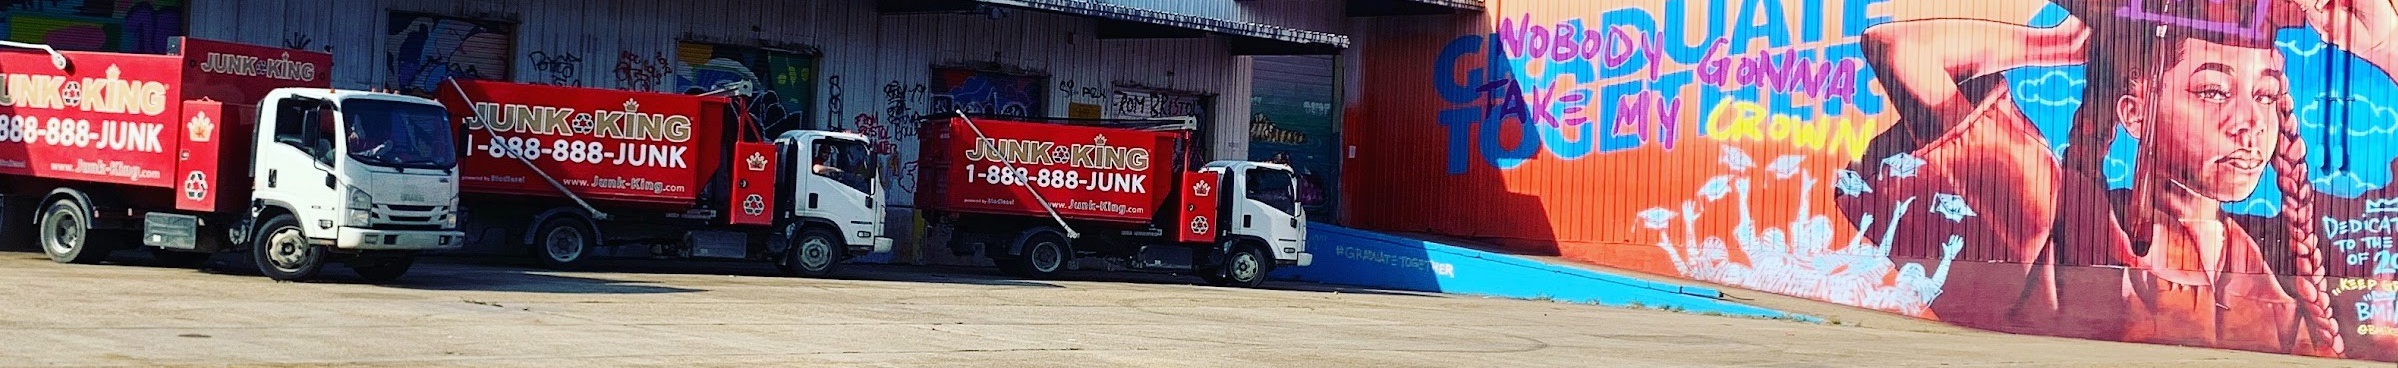 Junk Removal in New Orleans | Junk King New Orleans